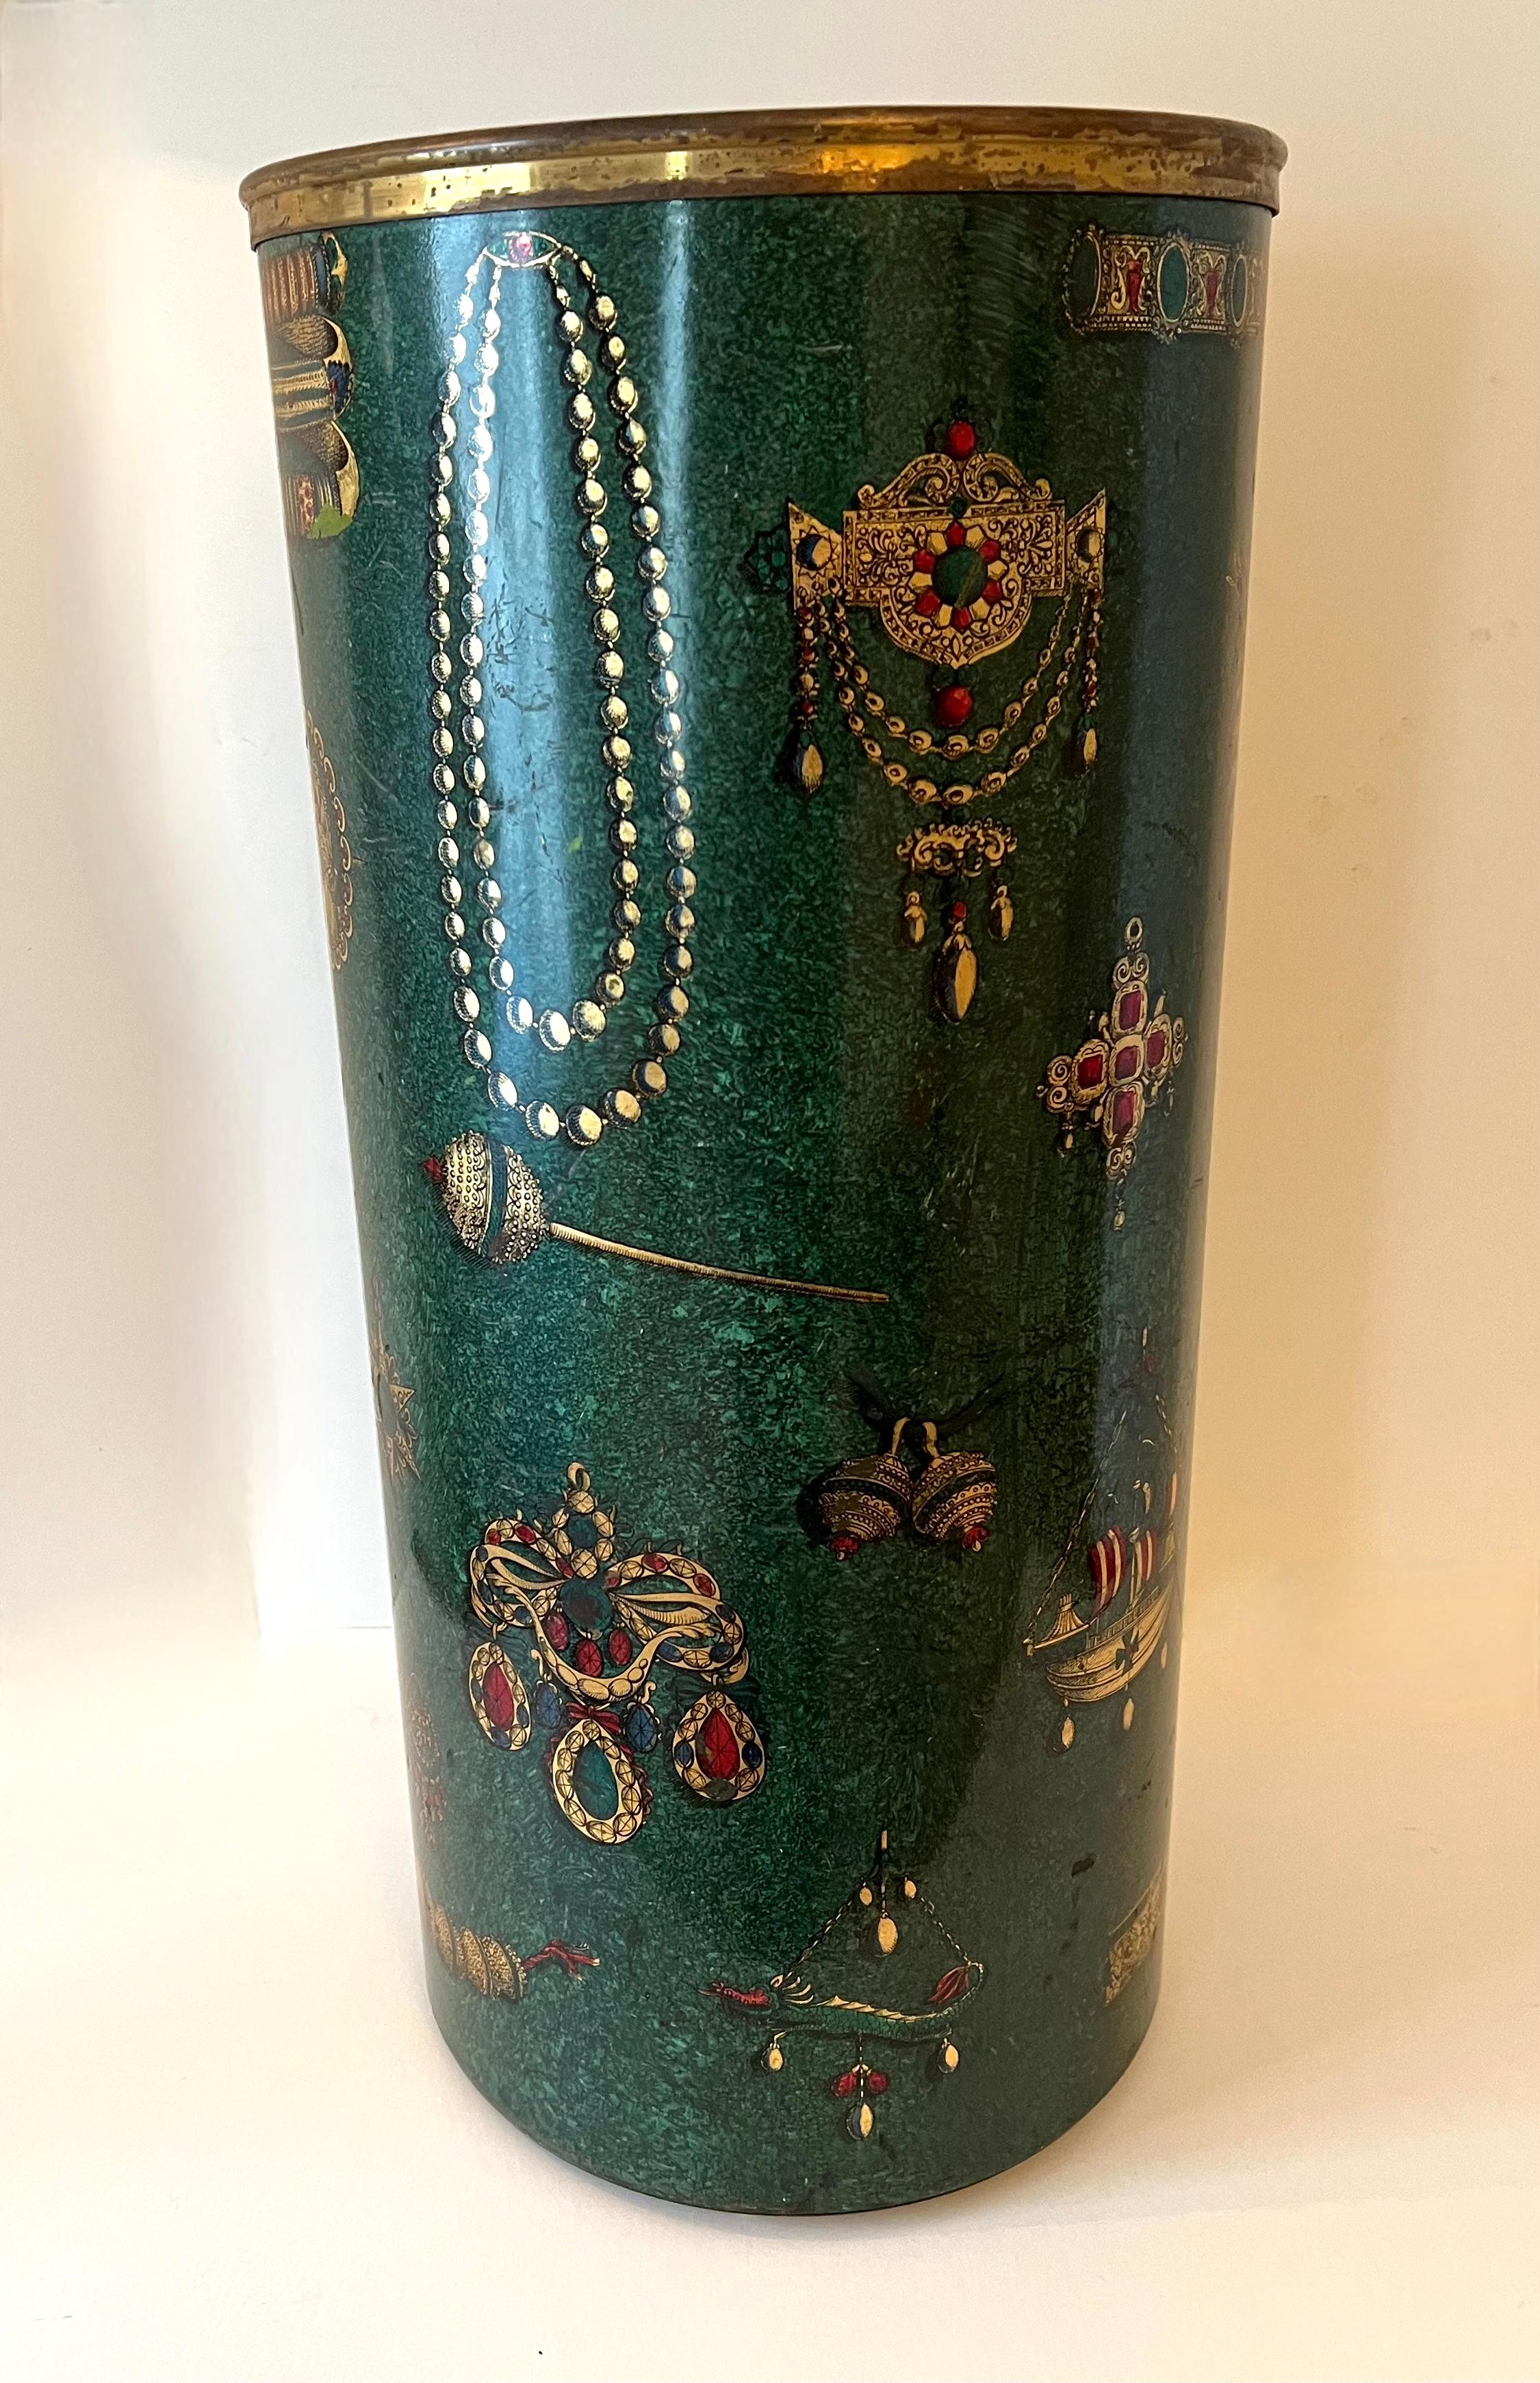 Piero Fornasetti enamel Umbrella stand. A large and important piece, not only in stature, but in epic design. The stand is a wonderful saturated Green enamel wiht images of jewels, Sailing ships, medals, etc. Own a piece of art that has and will